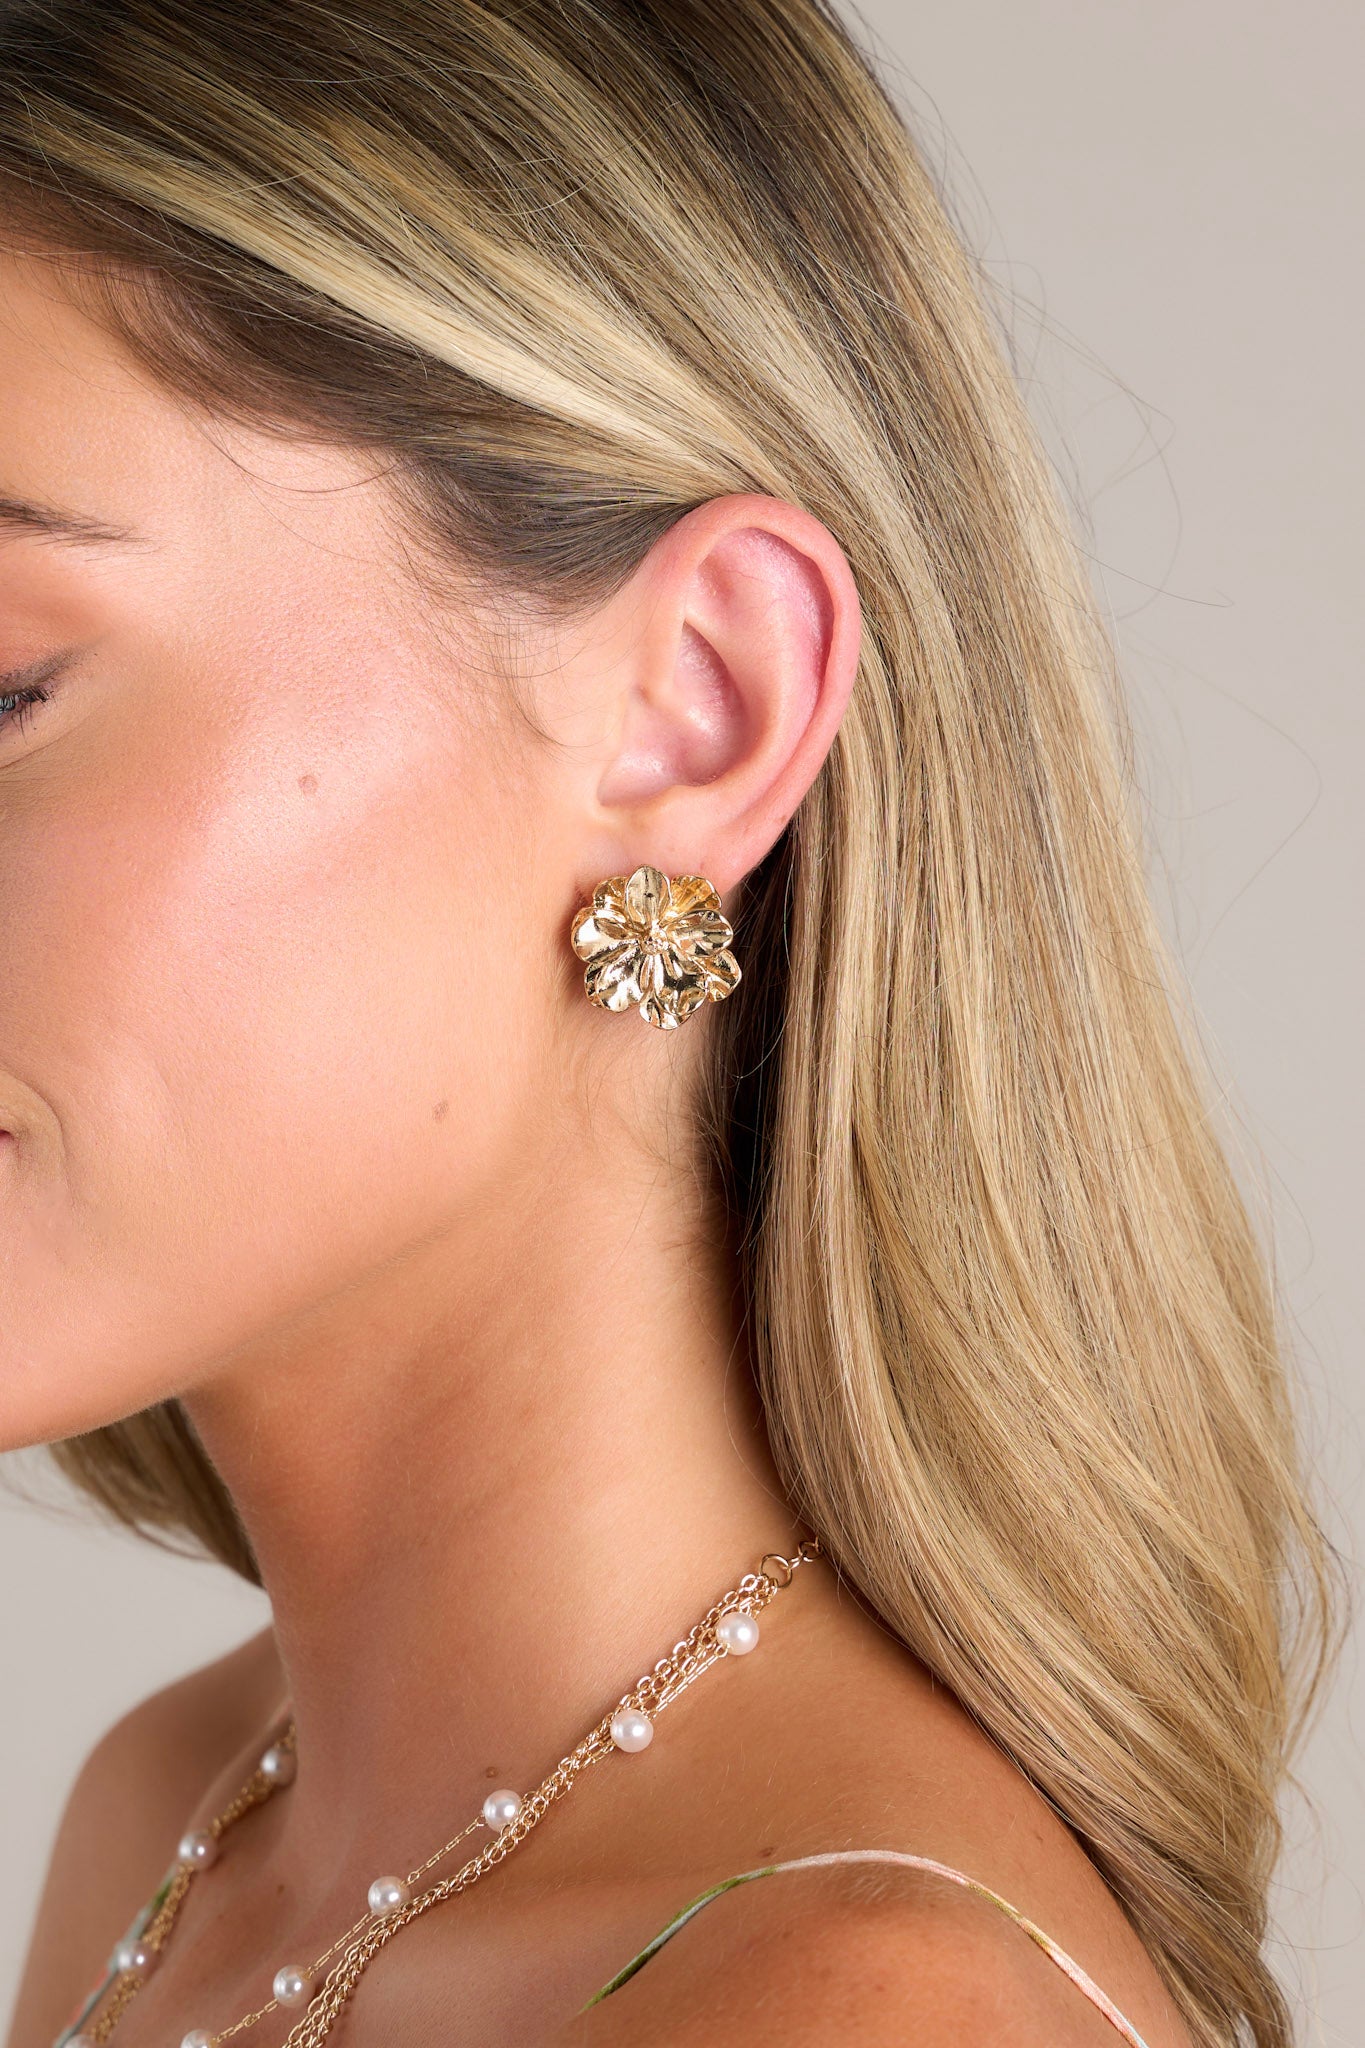 These earrings feature a gold finish, textured multi petal design, and secure post backing.